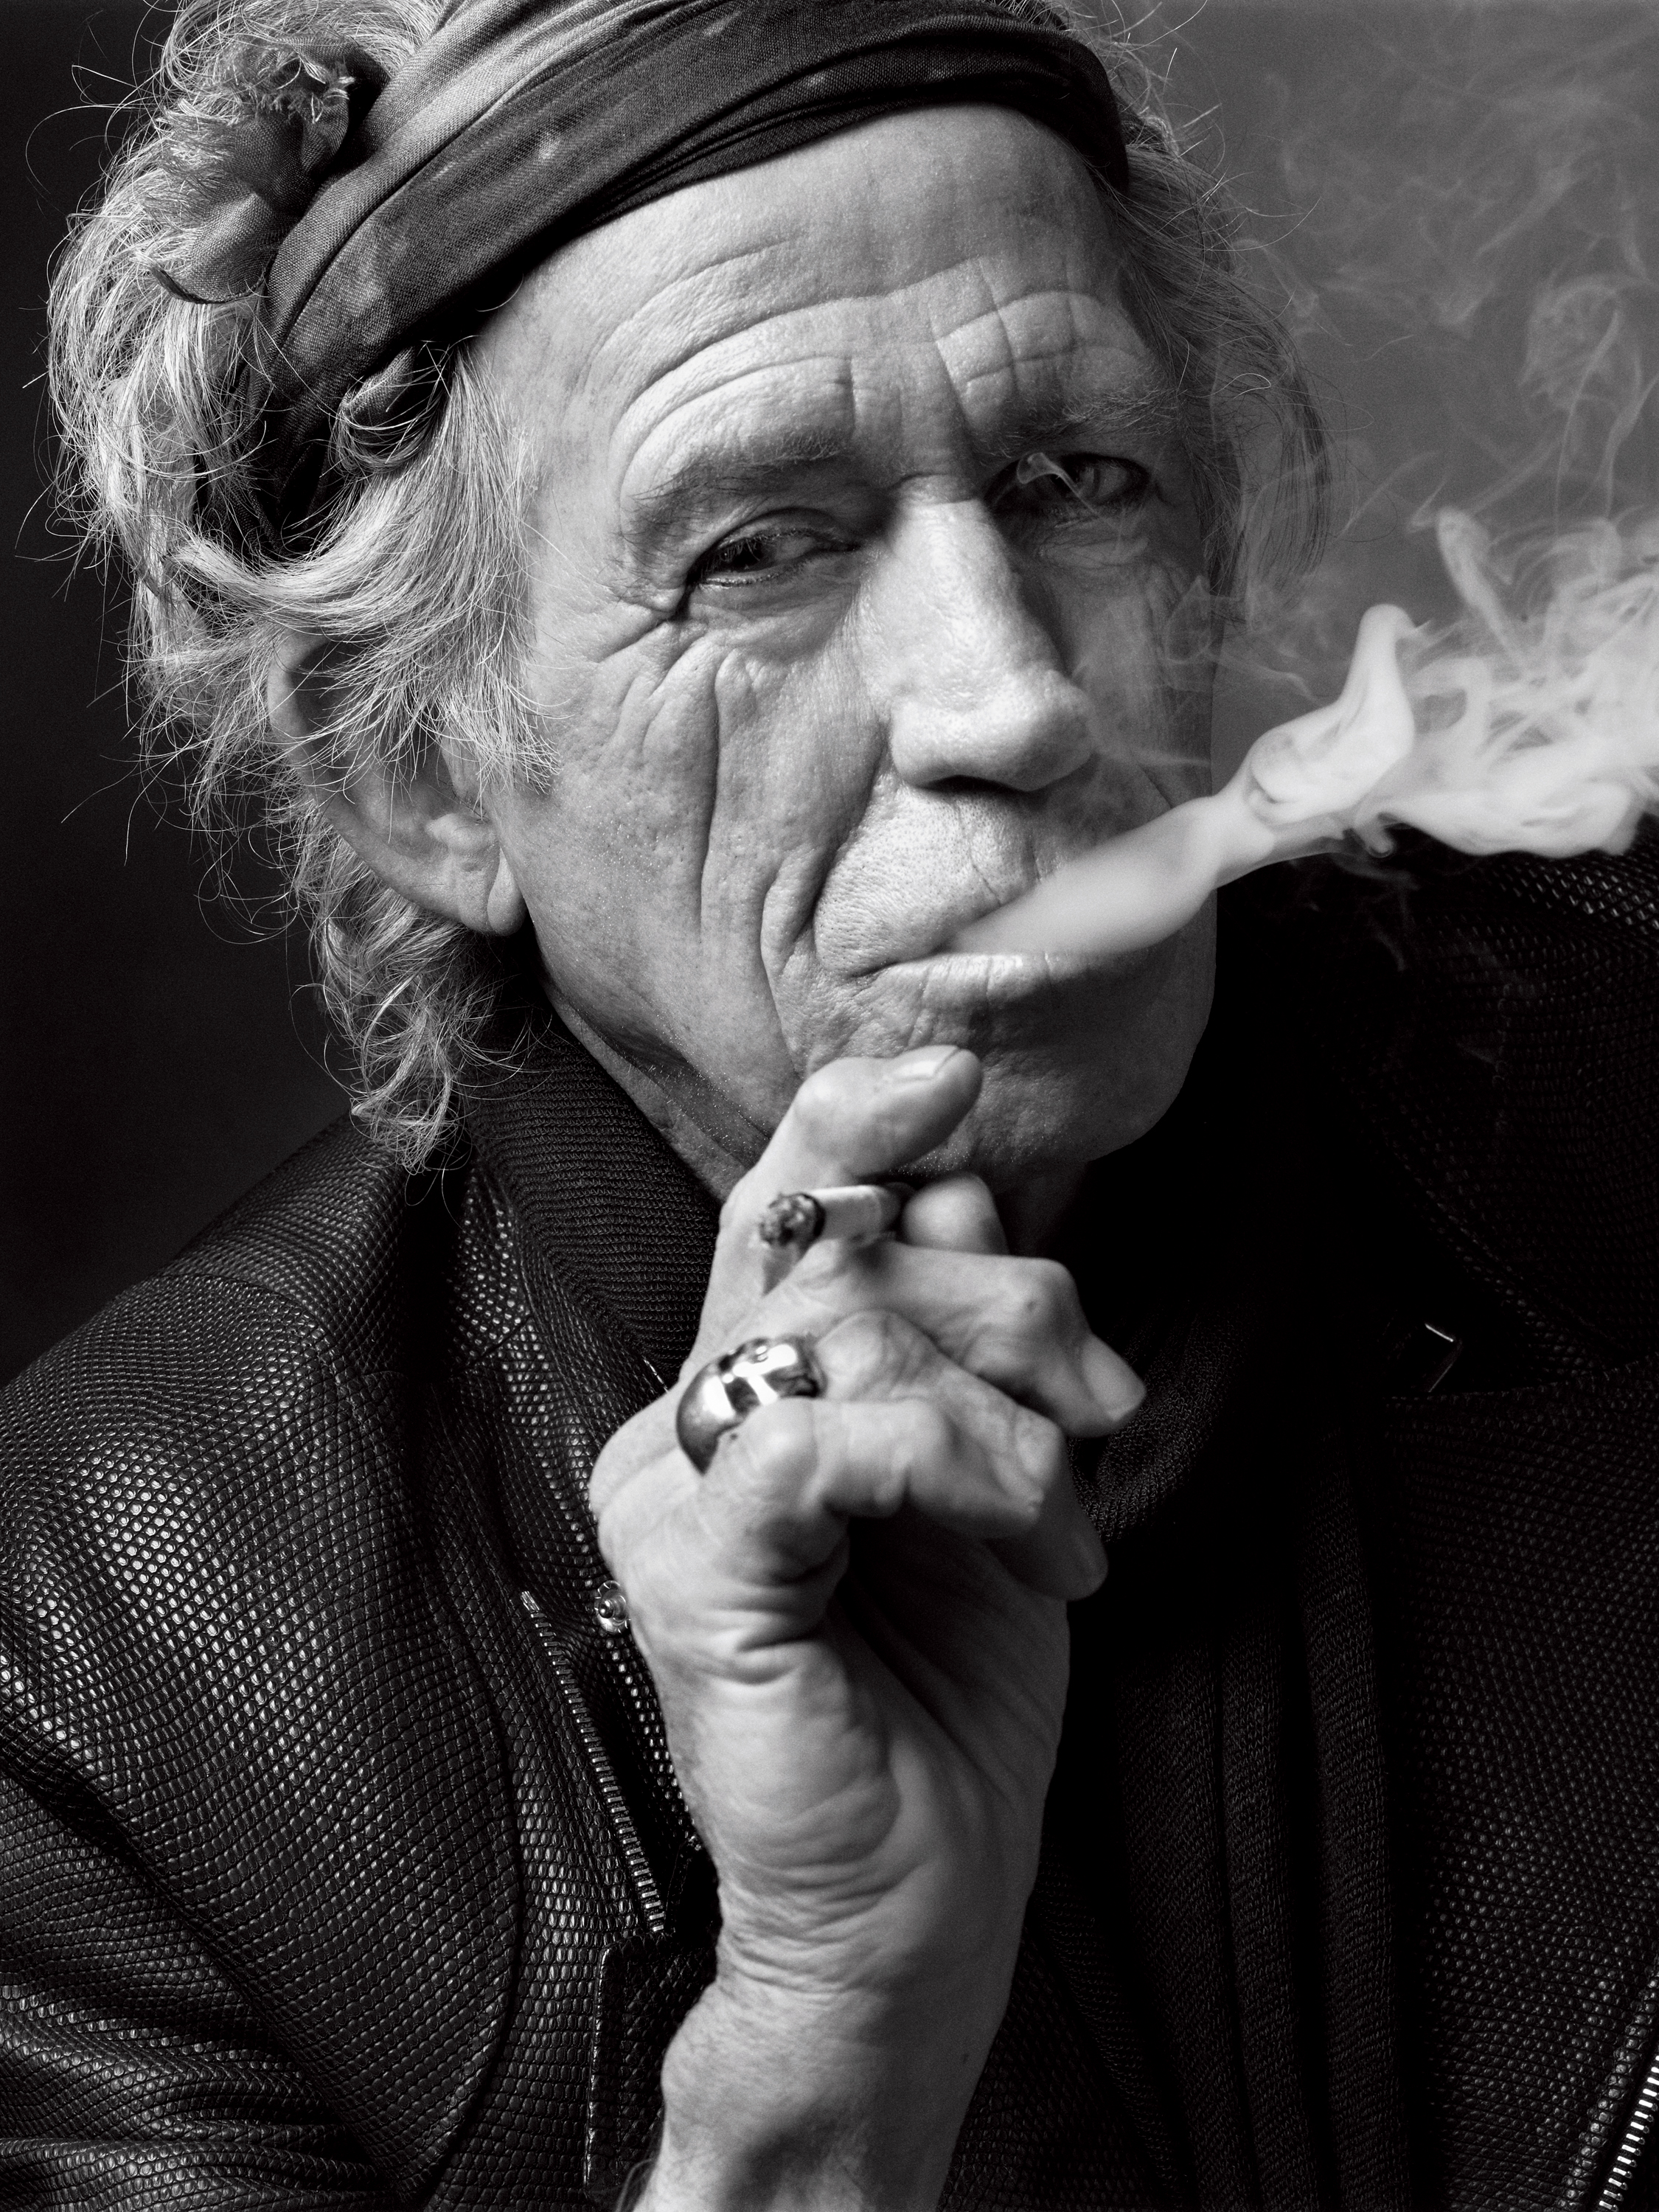 Keith Richards, New York, NY, 2011 photograph by Mark Seliger